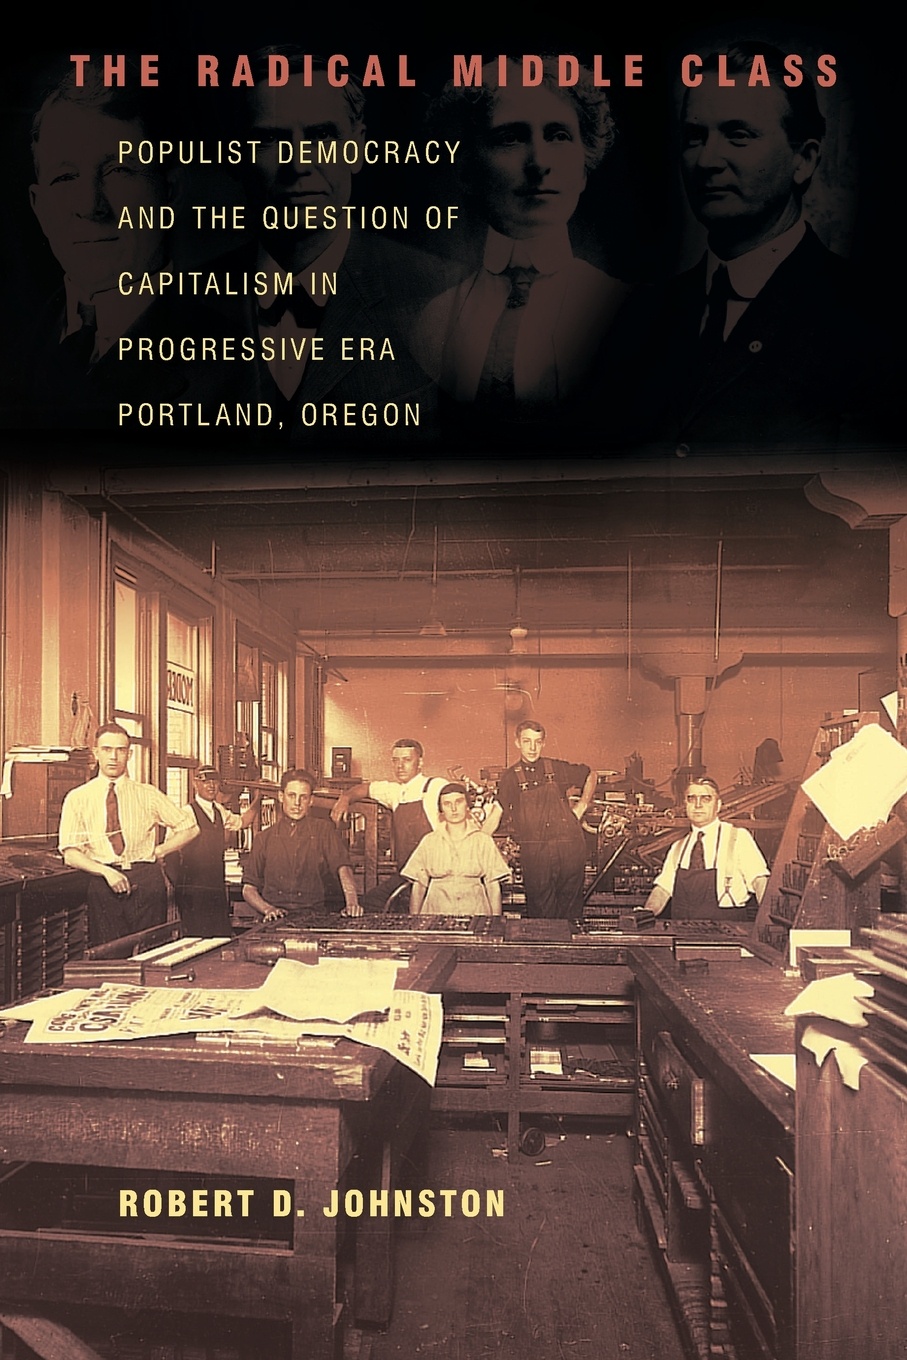 The Radical Middle Class. Populist Democracy and the Question of Capitalism in Progressive Era Portland, Oregon